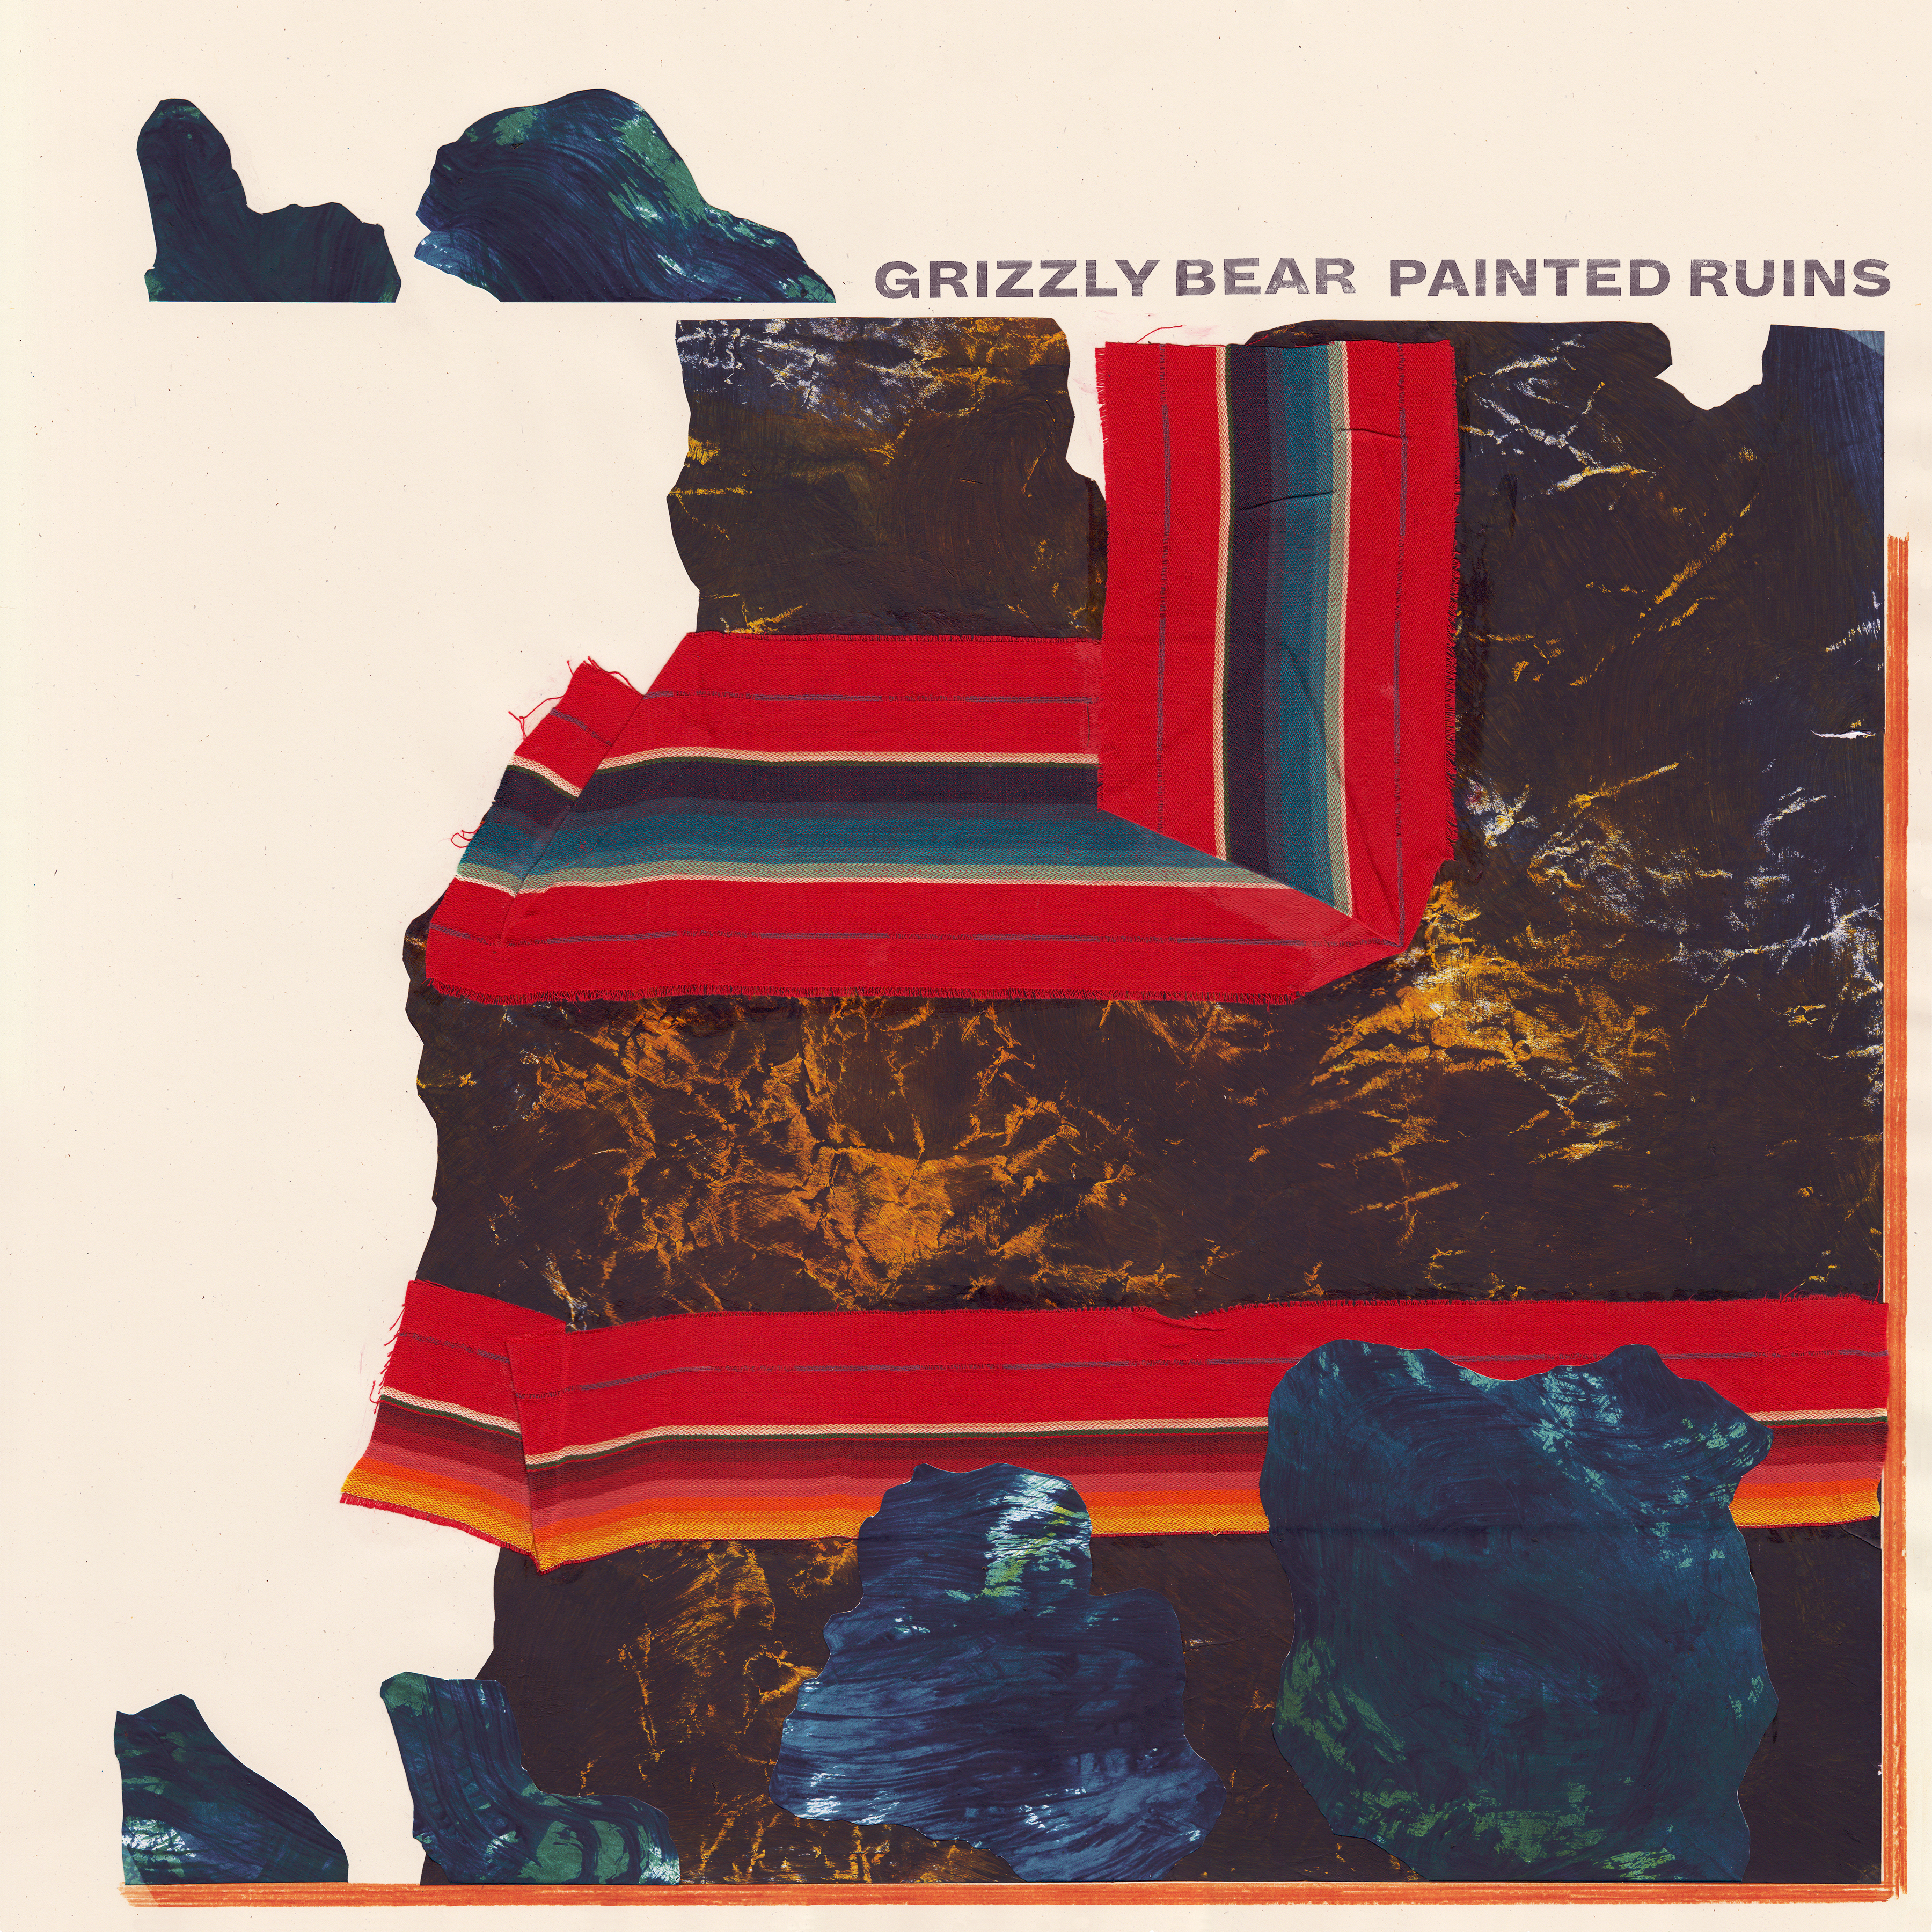 Grizzly Bear Announce New Album <i></noscript>Painted Ruins</i>, Share World Tour Dates” title=”Grizzly_Bear_Painted_Ruins_300dpi_12in_-_HiRes-1495051565″ data-original-id=”241021″ data-adjusted-id=”241021″ class=”sm_size_full_width sm_alignment_center ” data-image-source=”getty” /></p>
<div class=